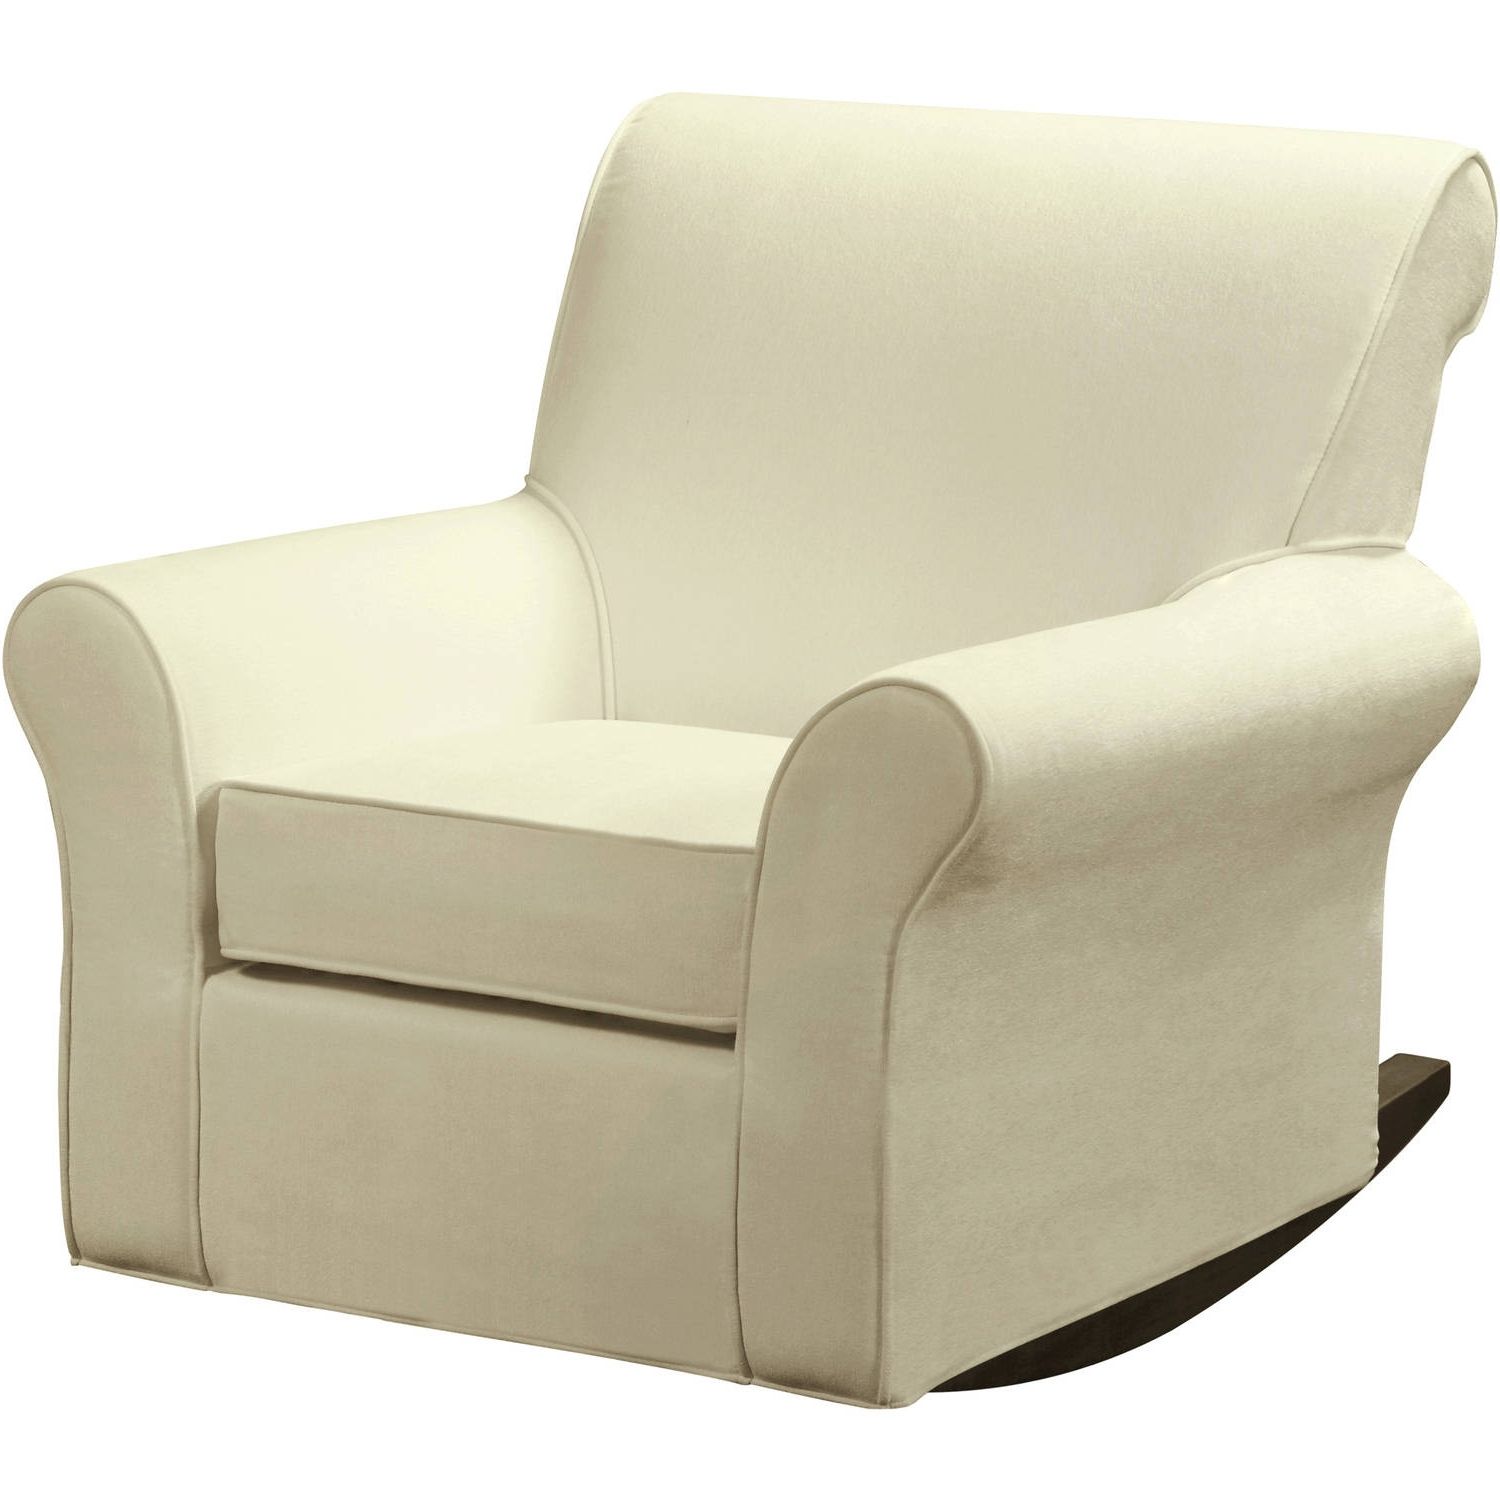 Walmart Rocking Chairs For Fashionable Baby Relax Microfiber Rocker And Slipcover, Beige – Walmart (View 4 of 20)